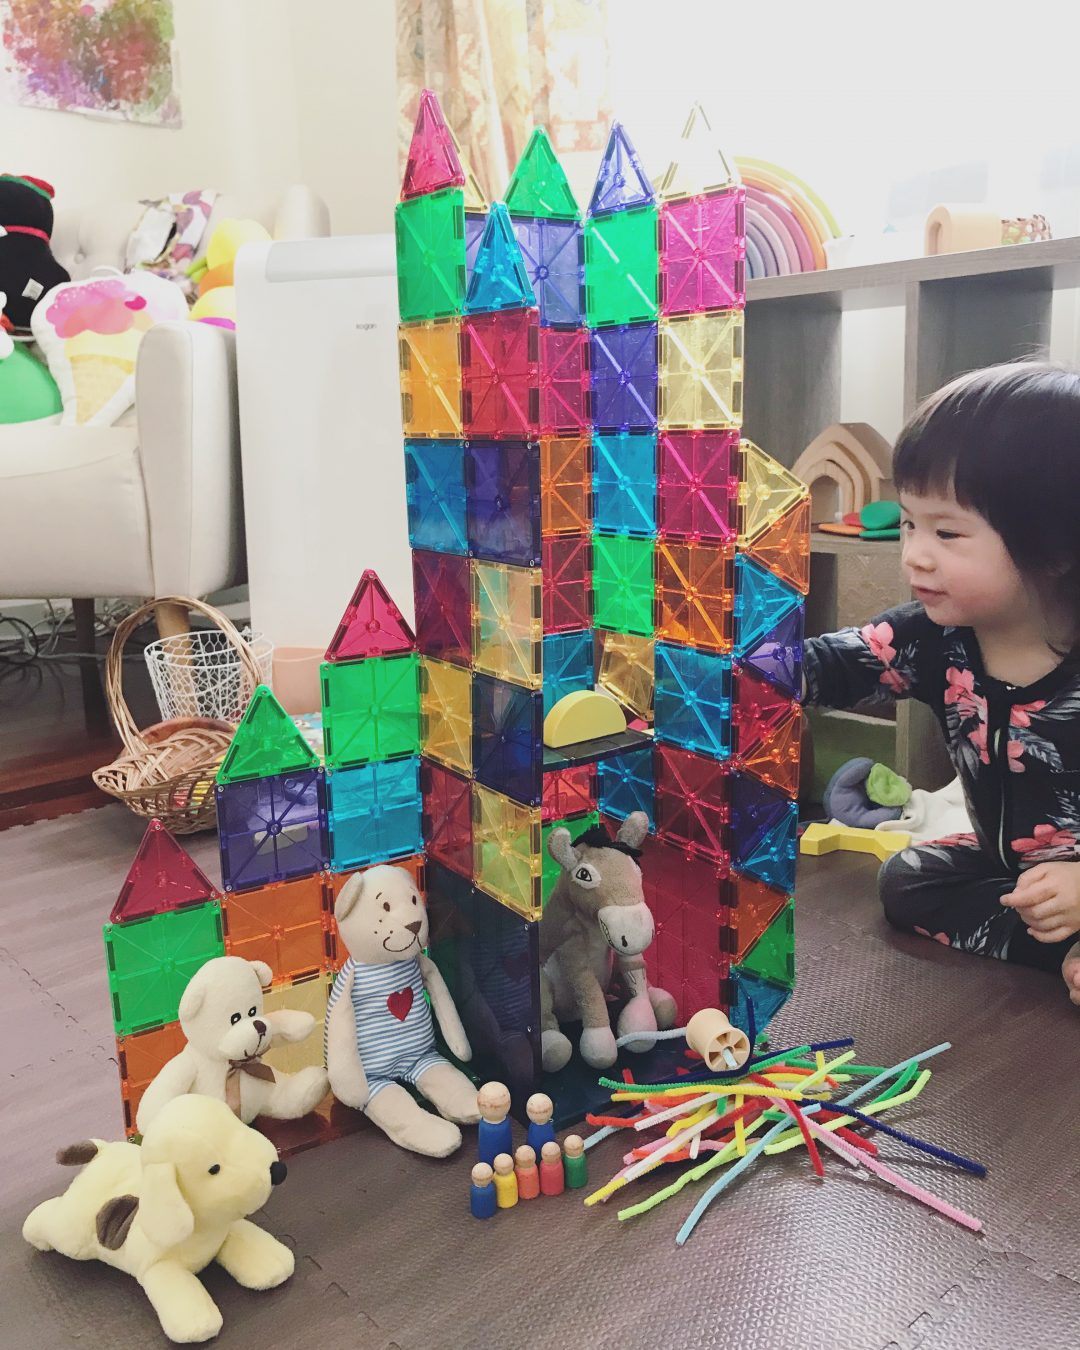 incorporating magnetic tiles in an imaginative play